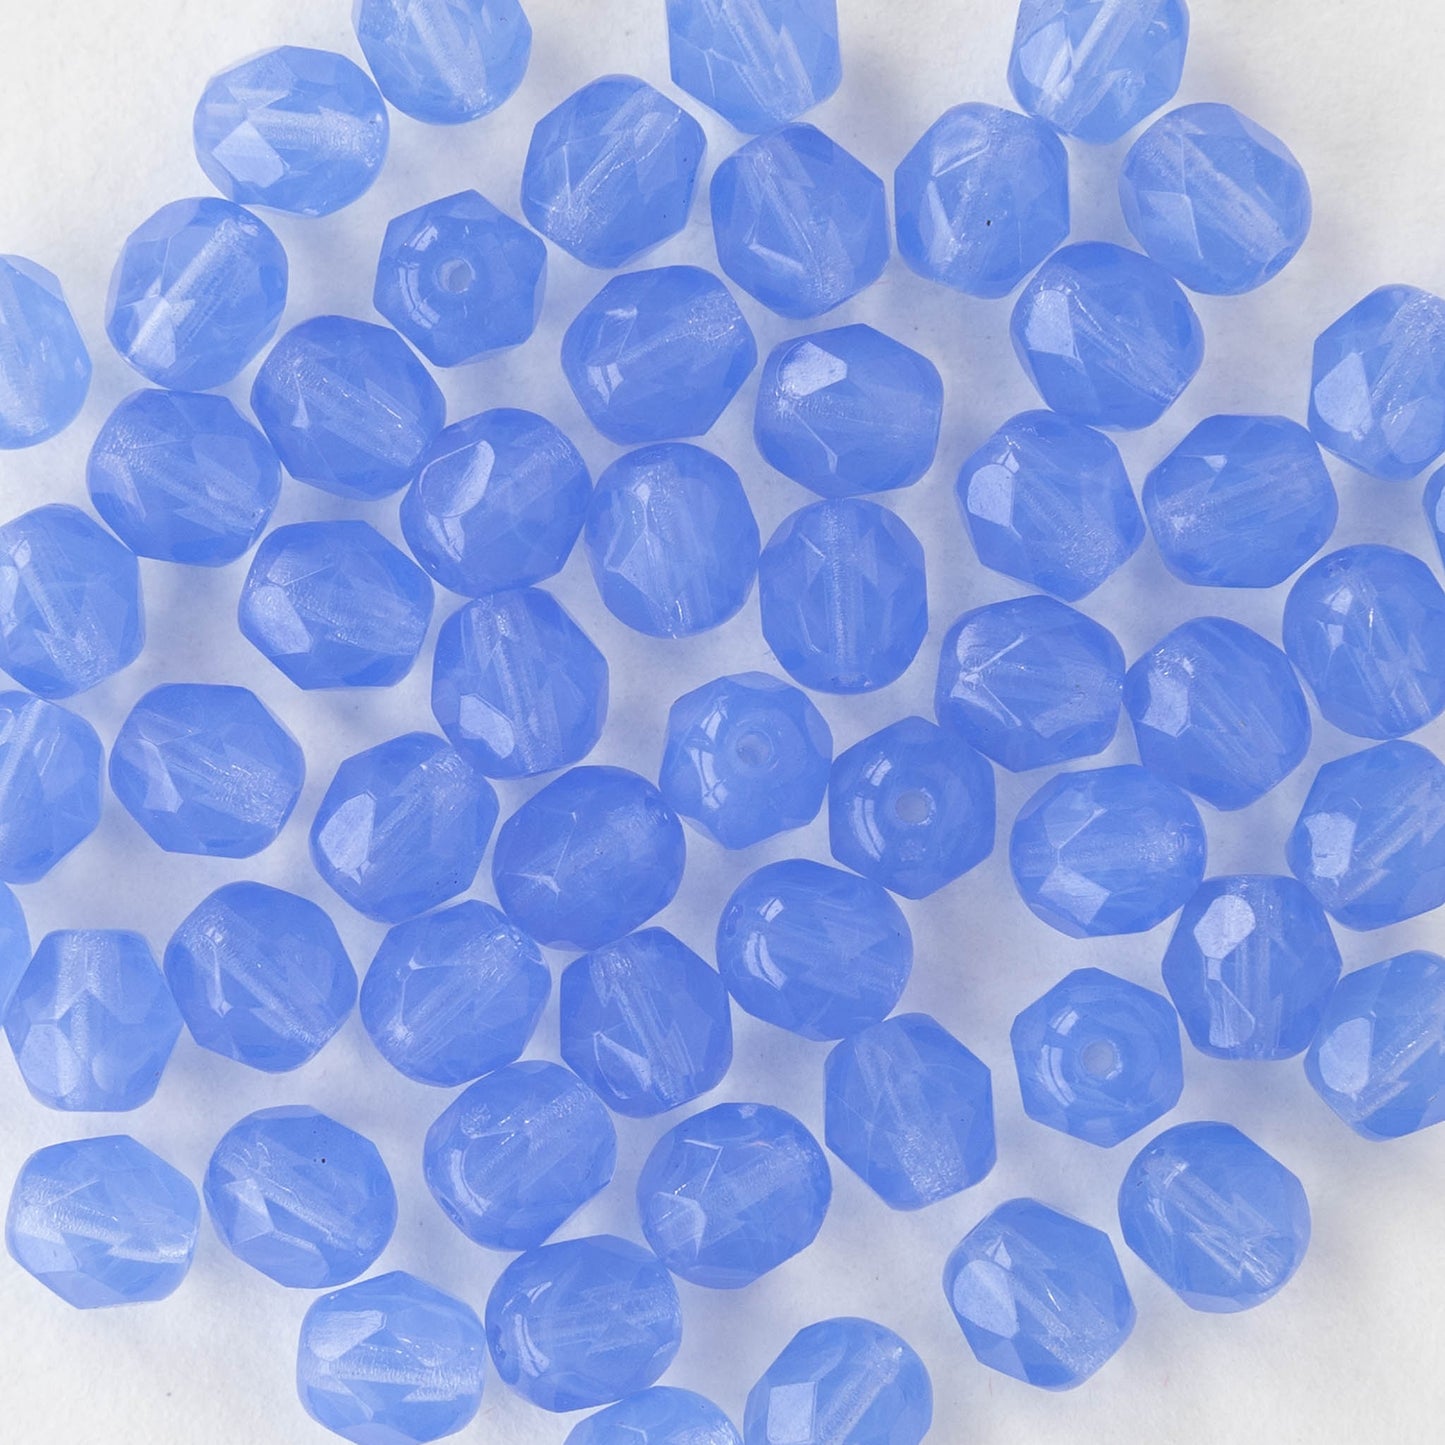 6mm Round Beads - Blue Opal - 50 beads